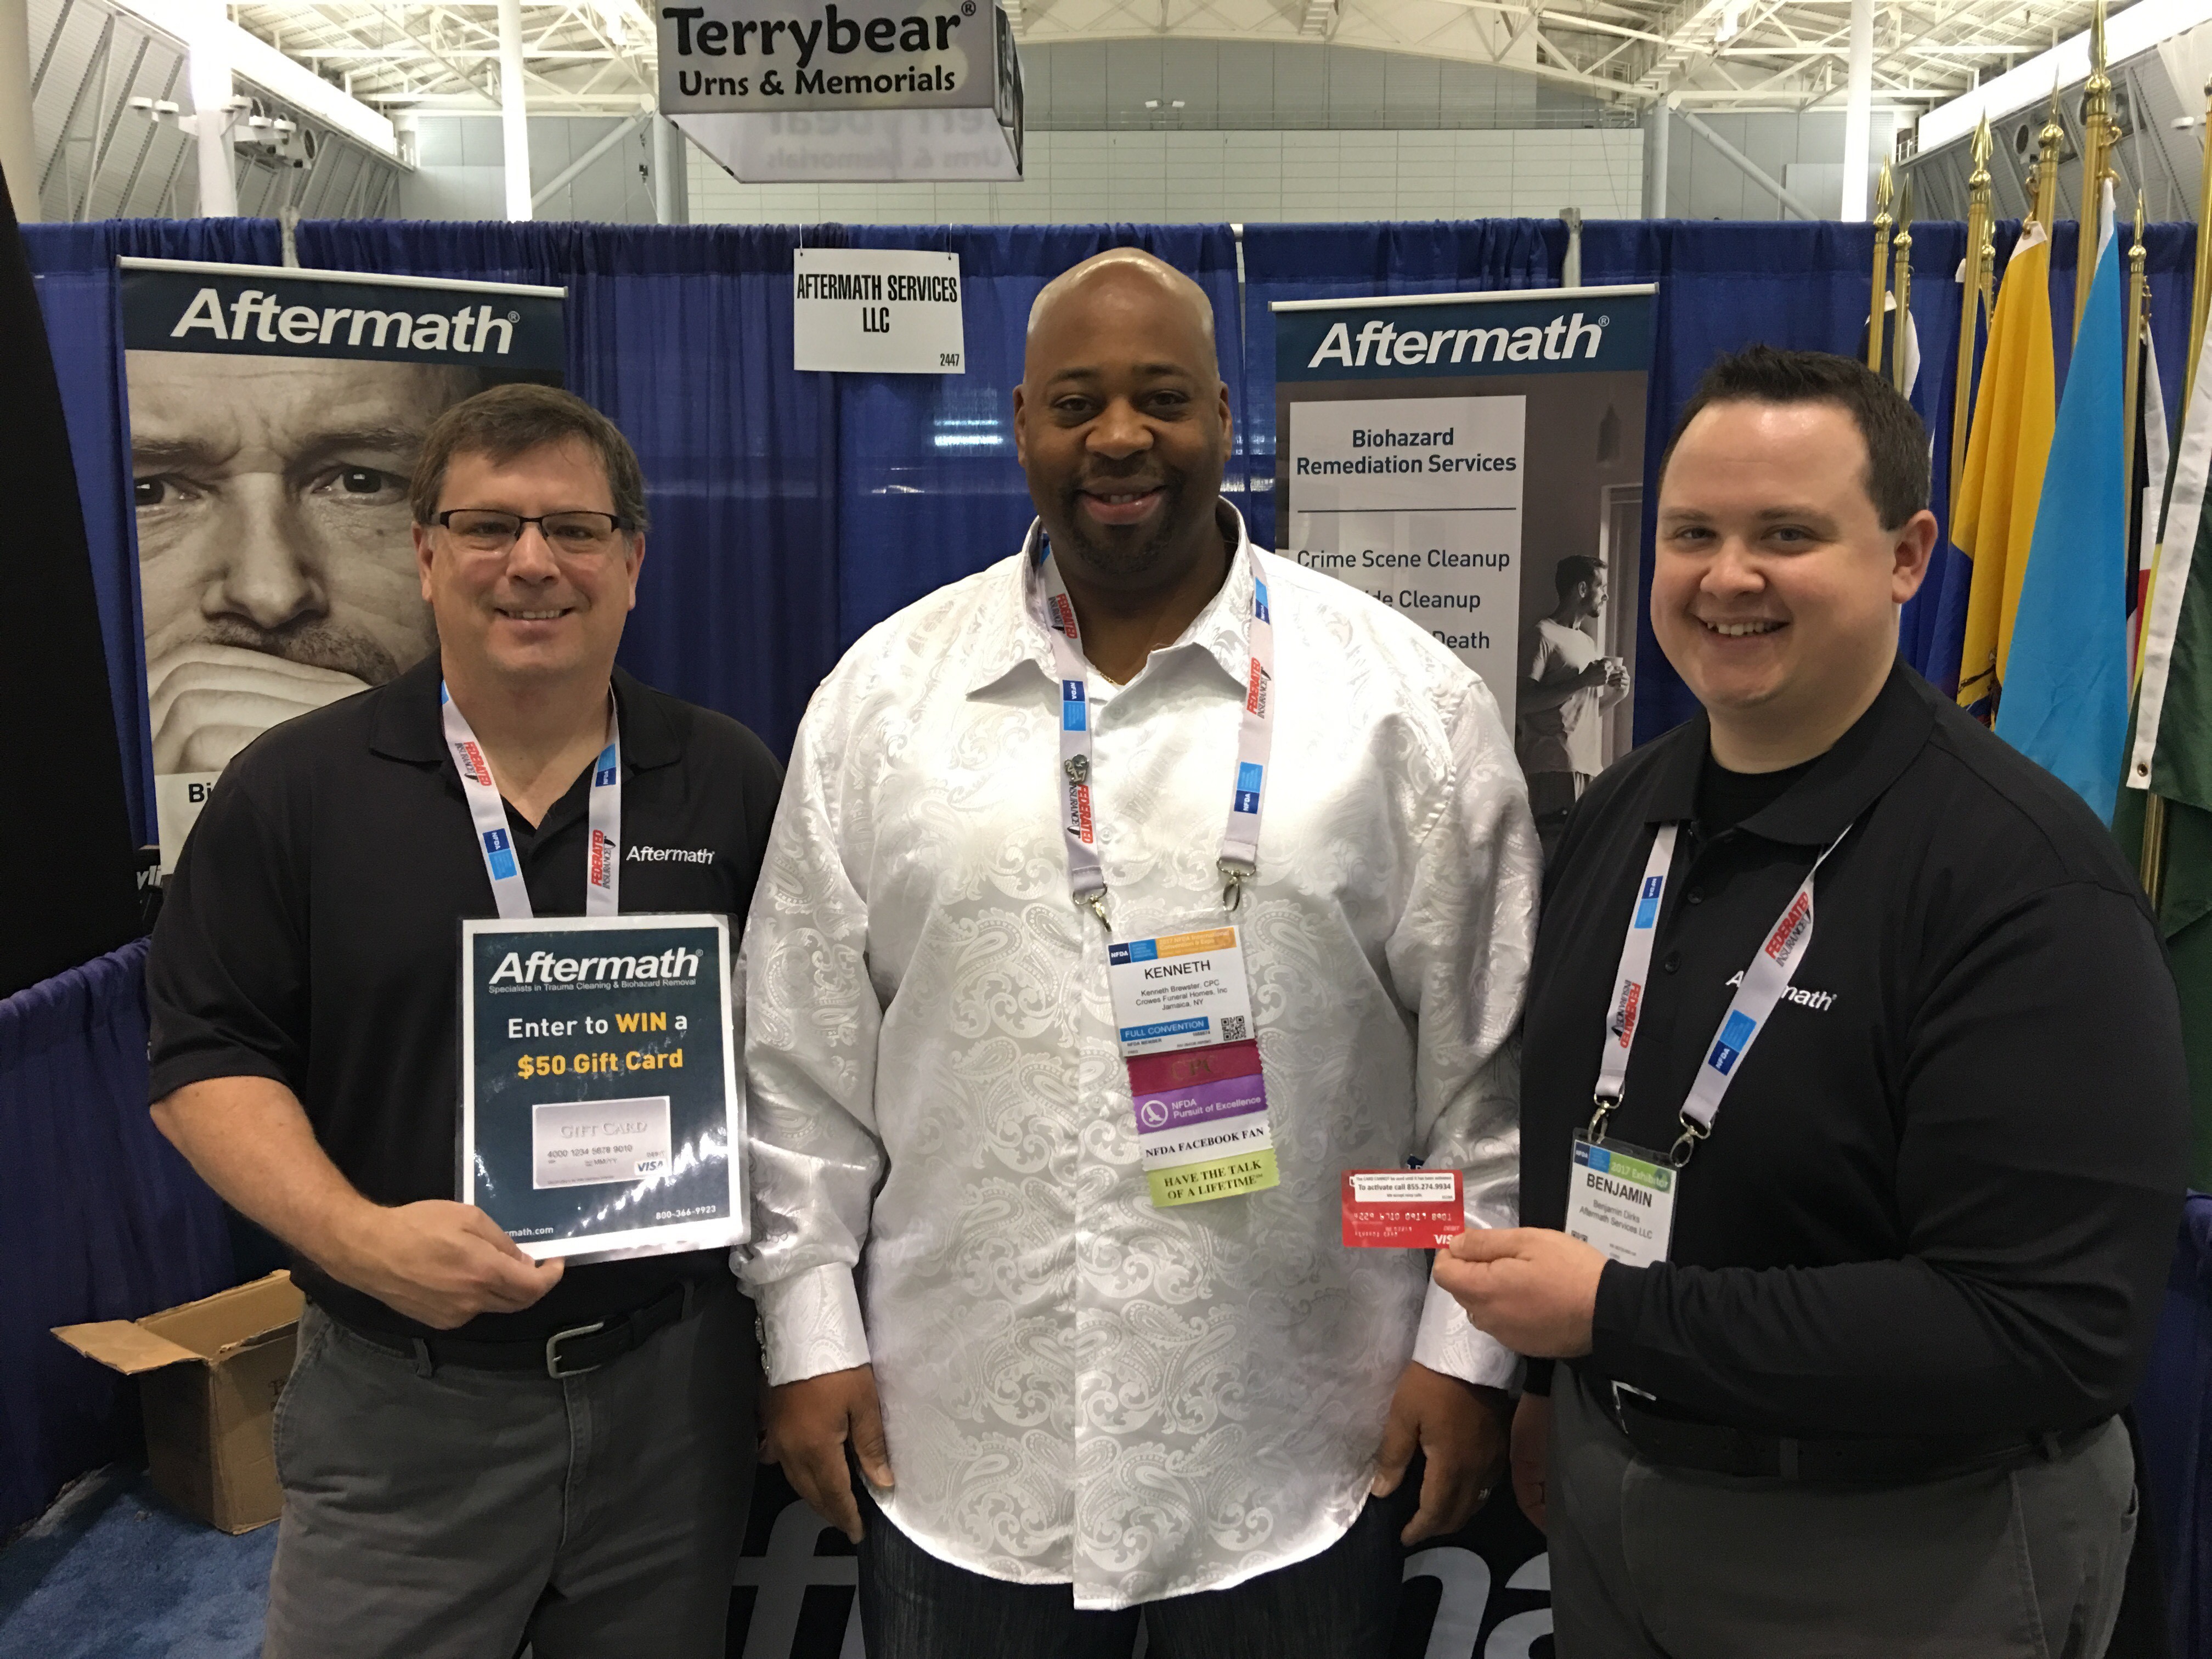 National Funeral Directors Assoc. Conference winner of Aftermath giveaway standing with Ben from Aftermath.